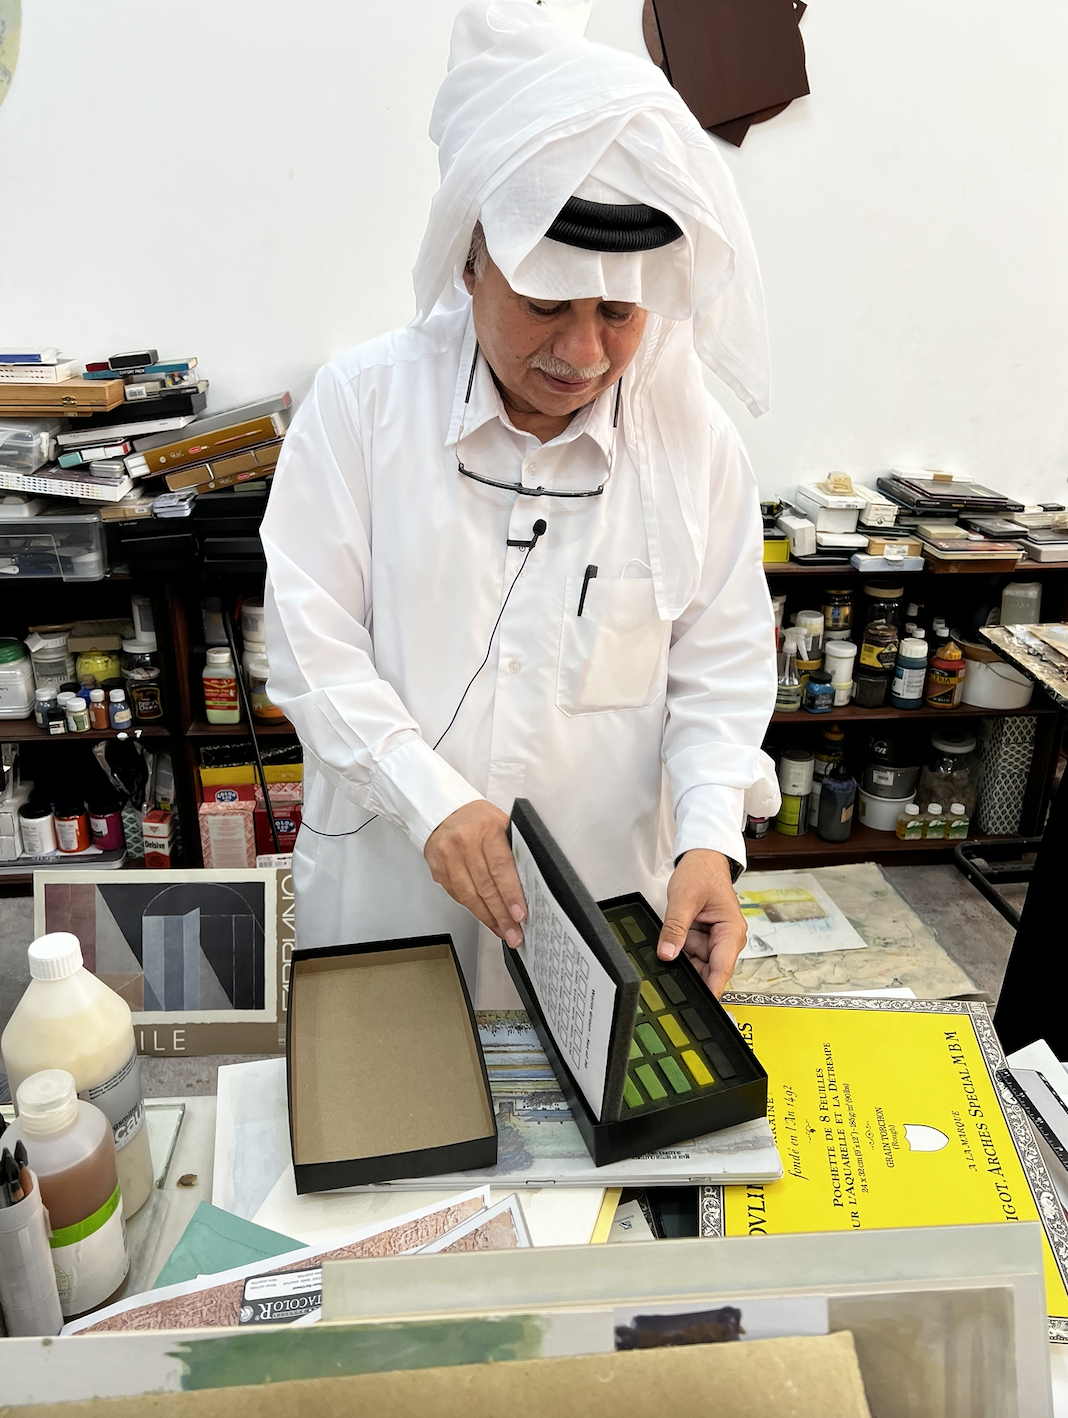 A Qatari artist wearing all white traditional clothing looks down at a watercolour paint palate, surrounded by art materials.